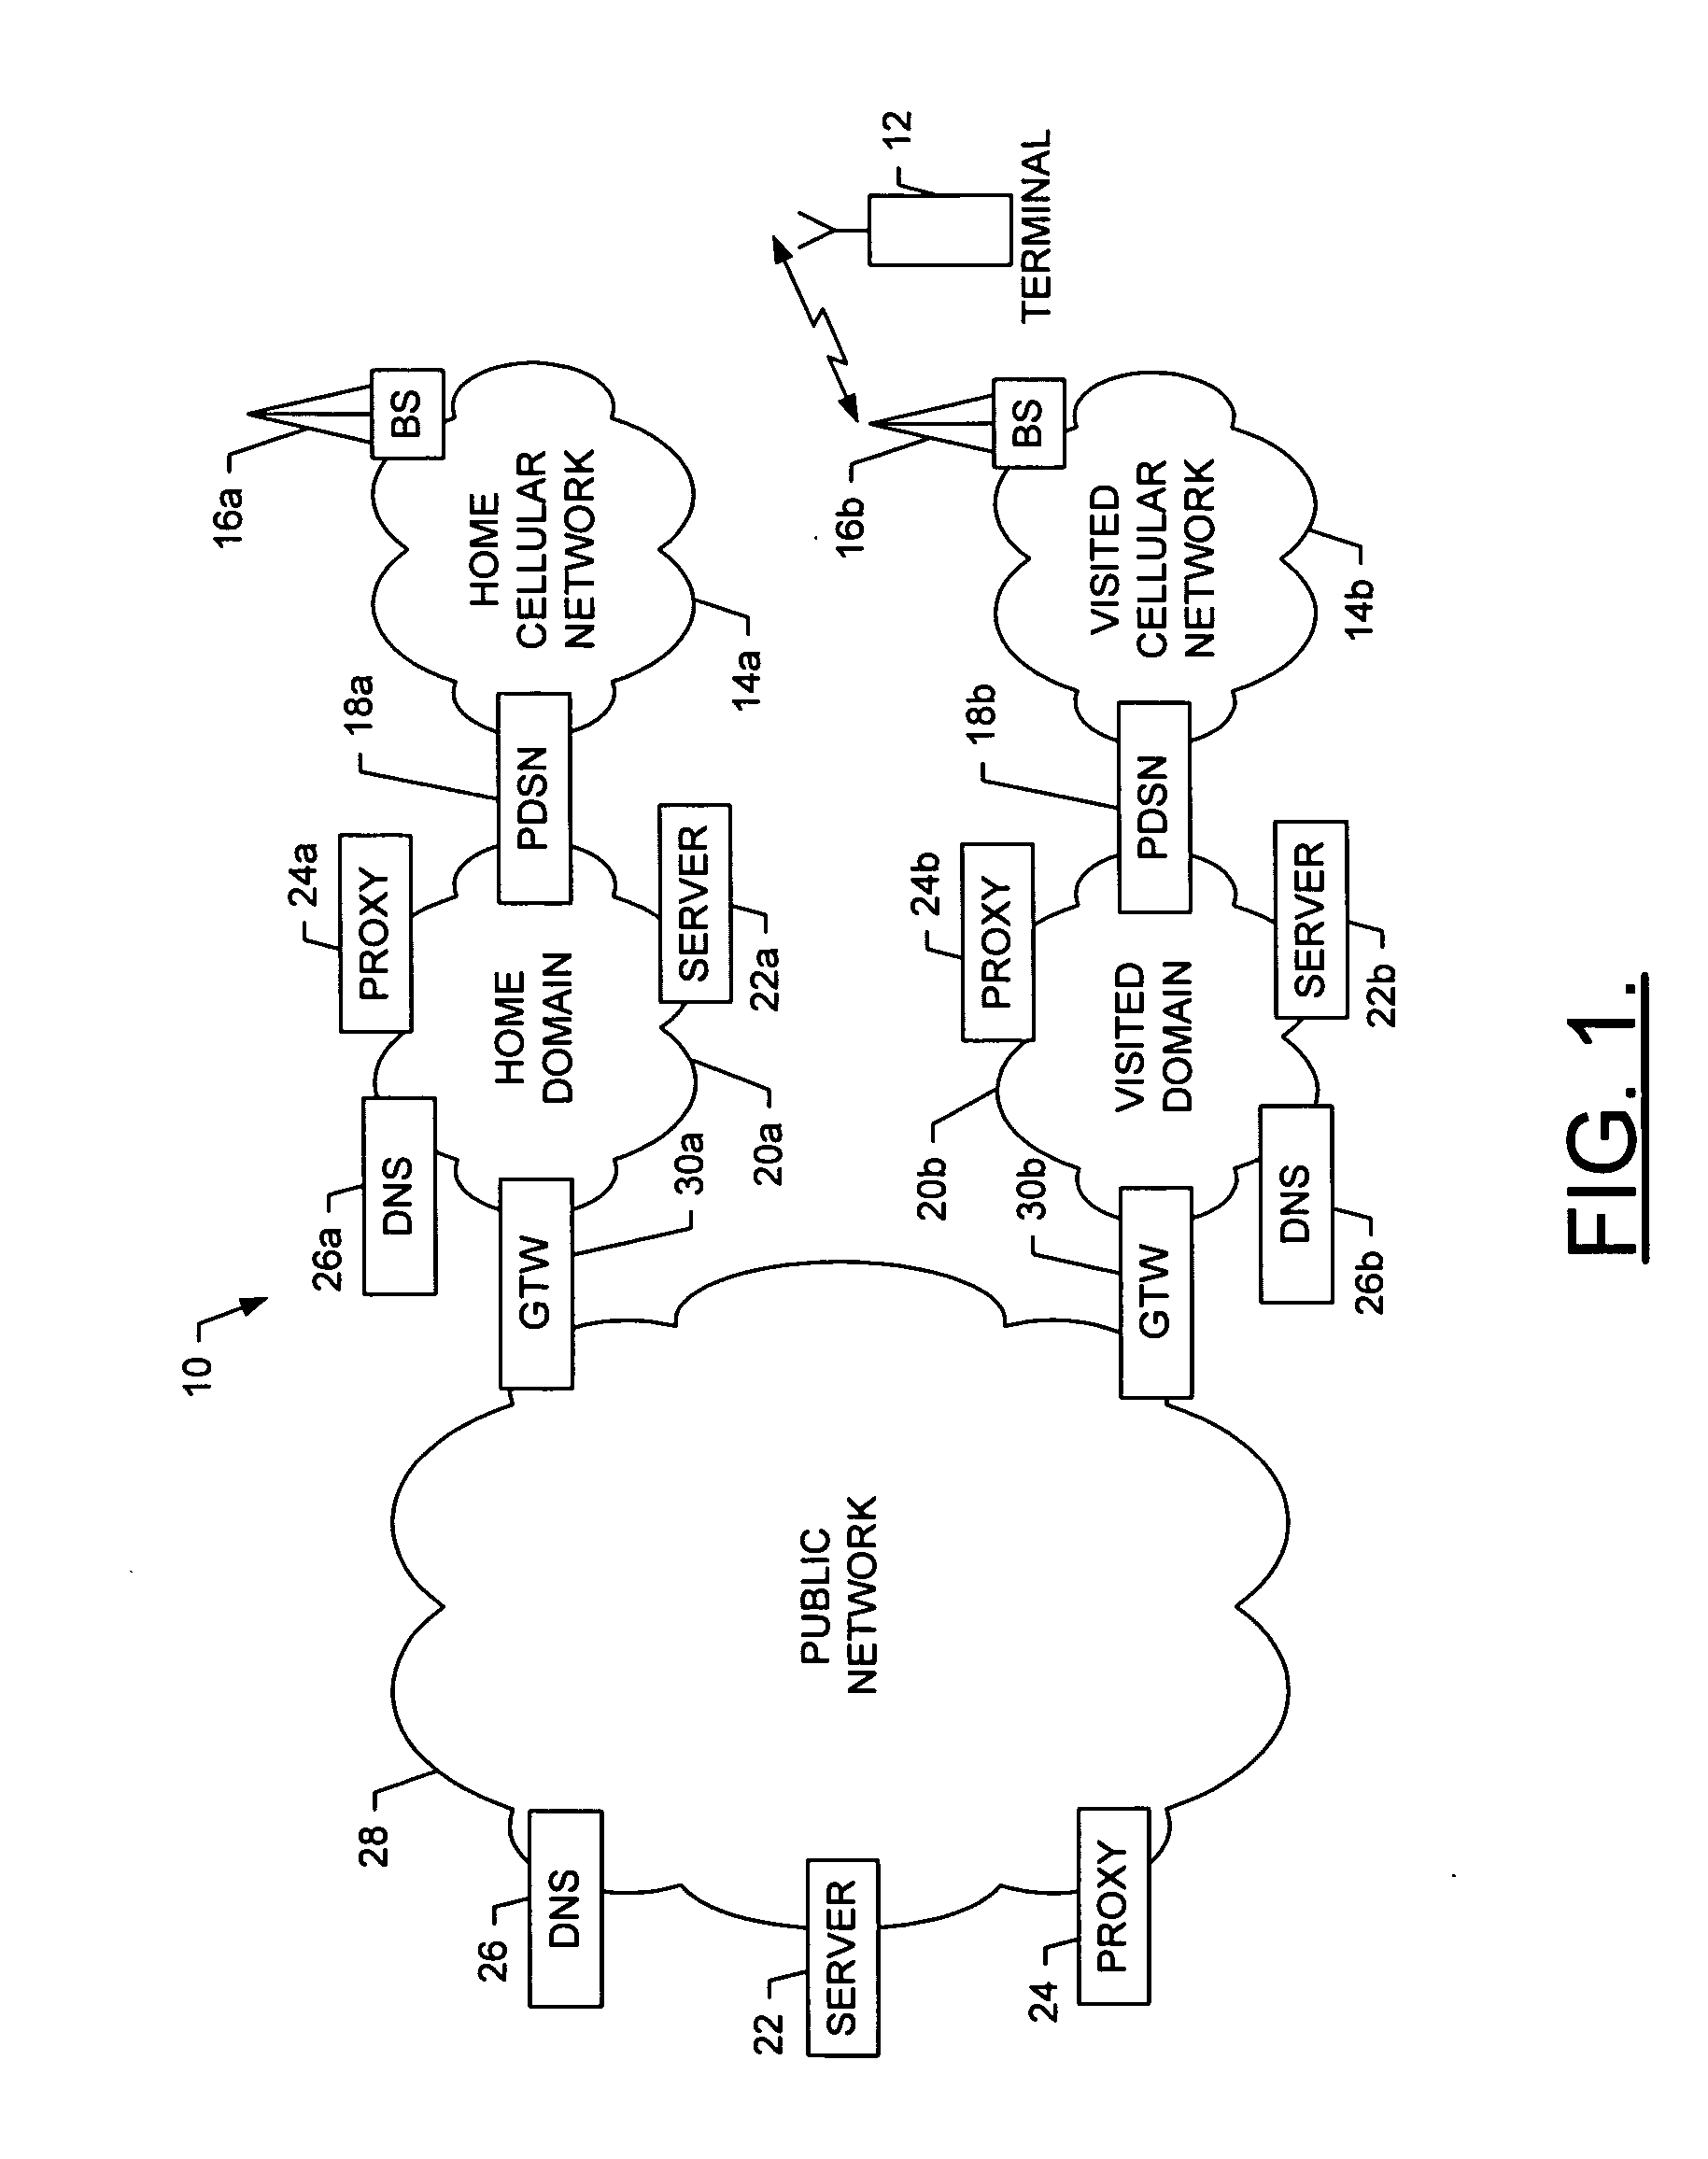 System and method for service discovery during connection setup in a wireless environment